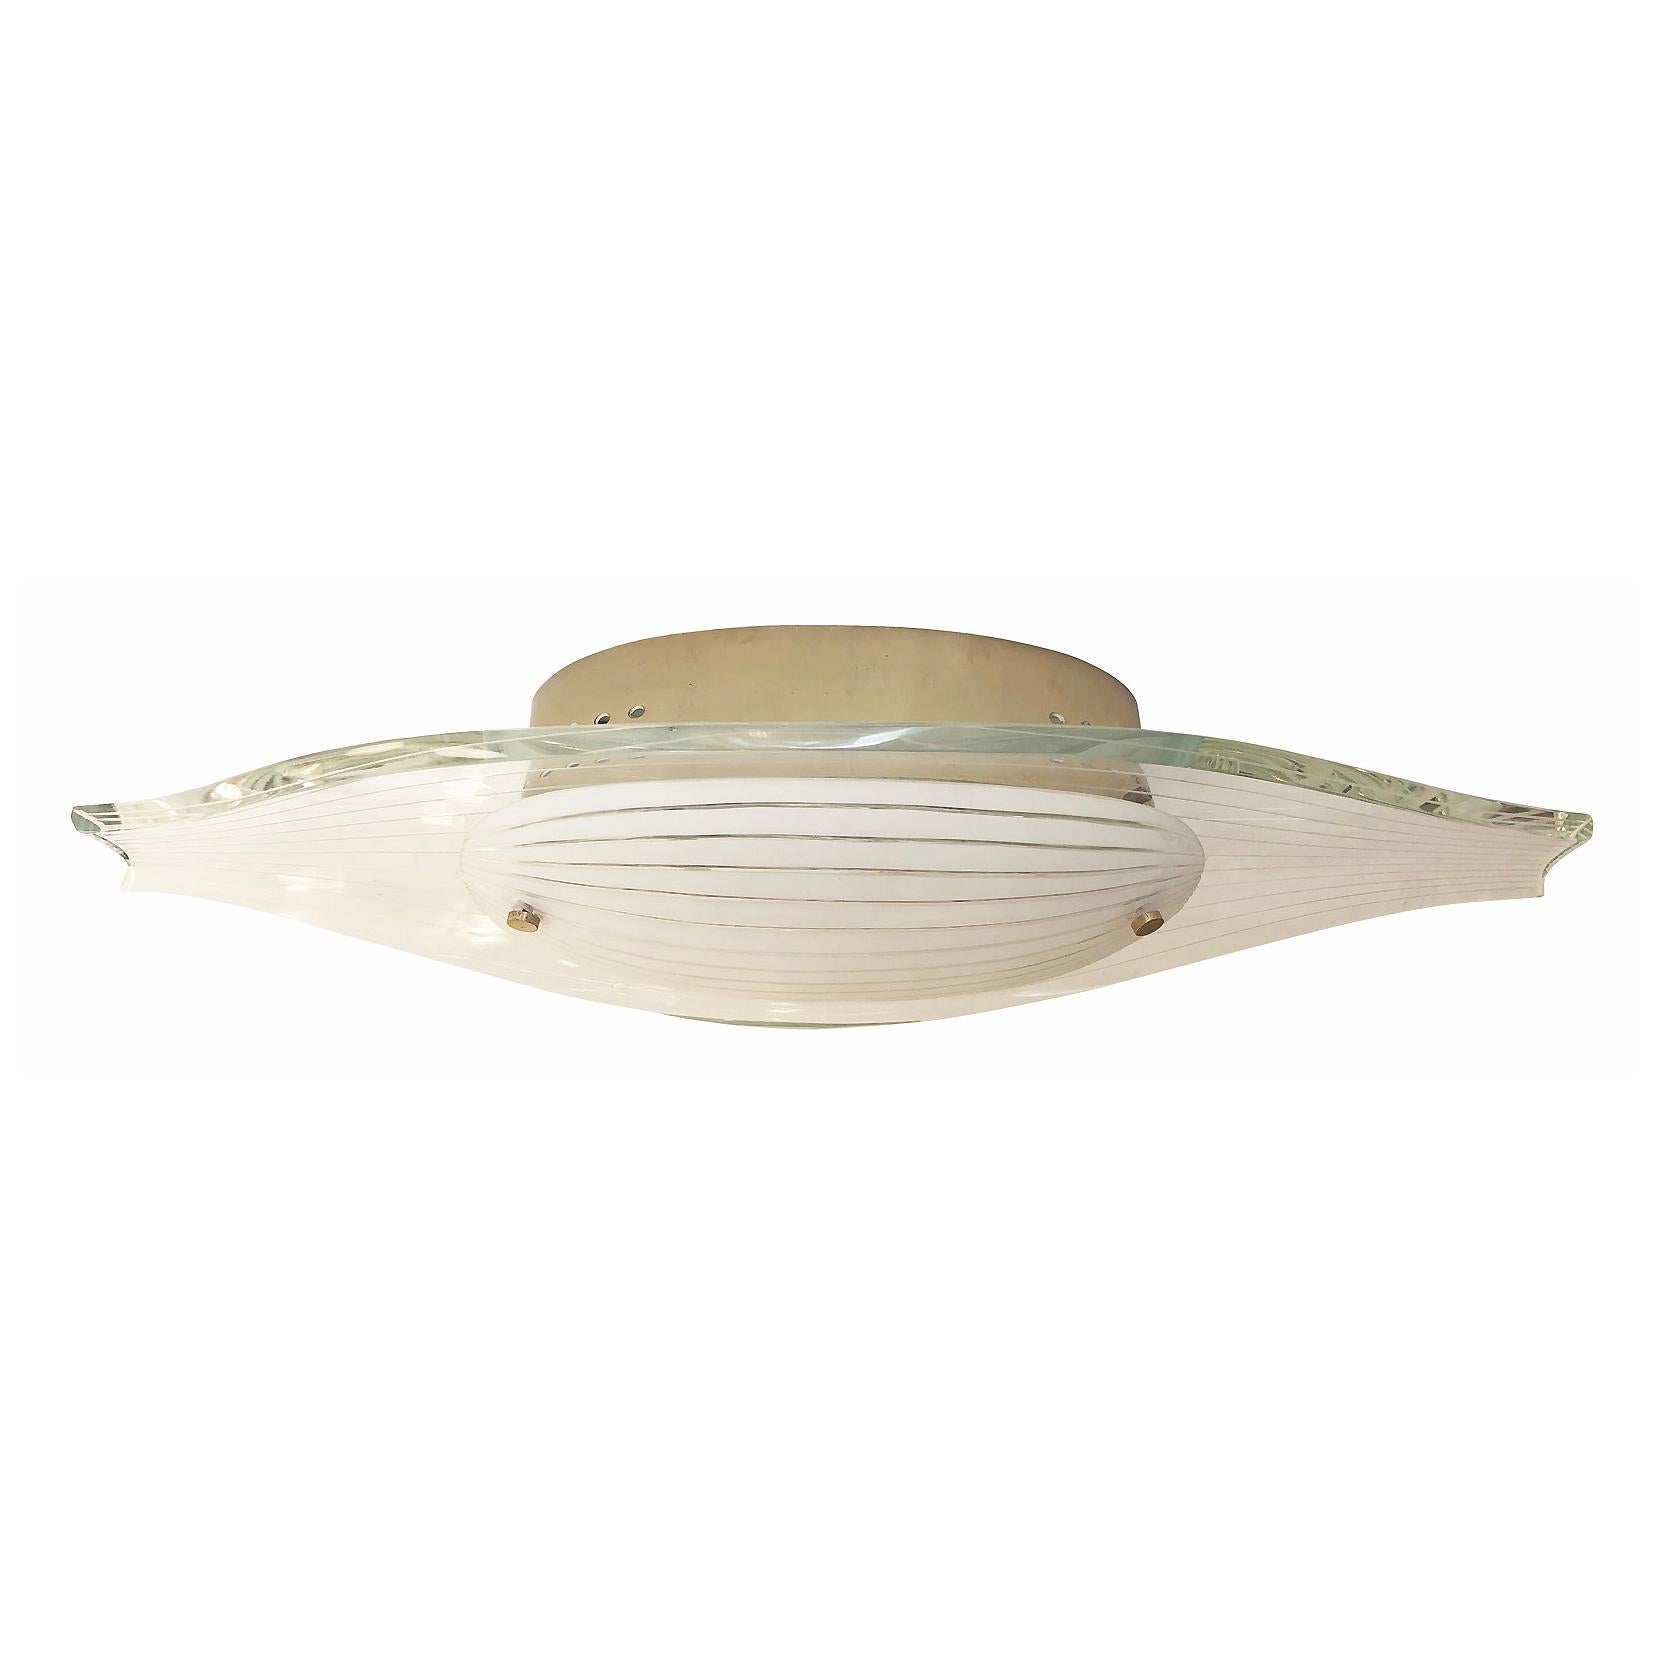 Fontana Arte flush mount model 2340 deigned by Max Ingrand in the 1960’s. Composed of a contoured hand polished glass with a frosted glass diffuser at the center. Both glasses have thin etched lines the follow the sloping shape of the fixture.